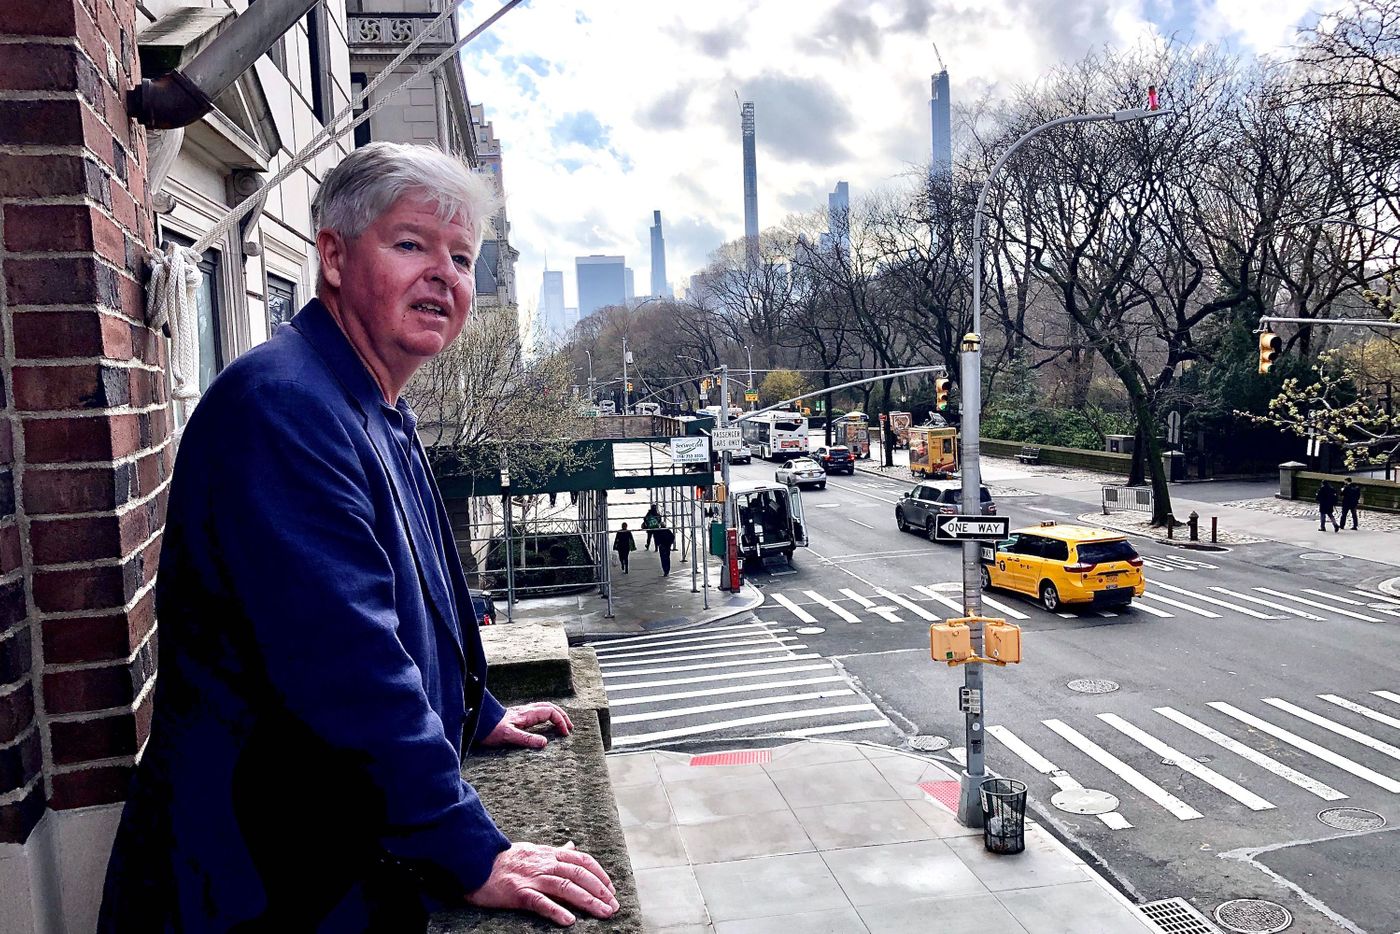 Christopher Cahill, director of the American Irish Historical Society, overlooks the Fifth Avenue St. Patrick’s Day parade route, March 13, 2020.